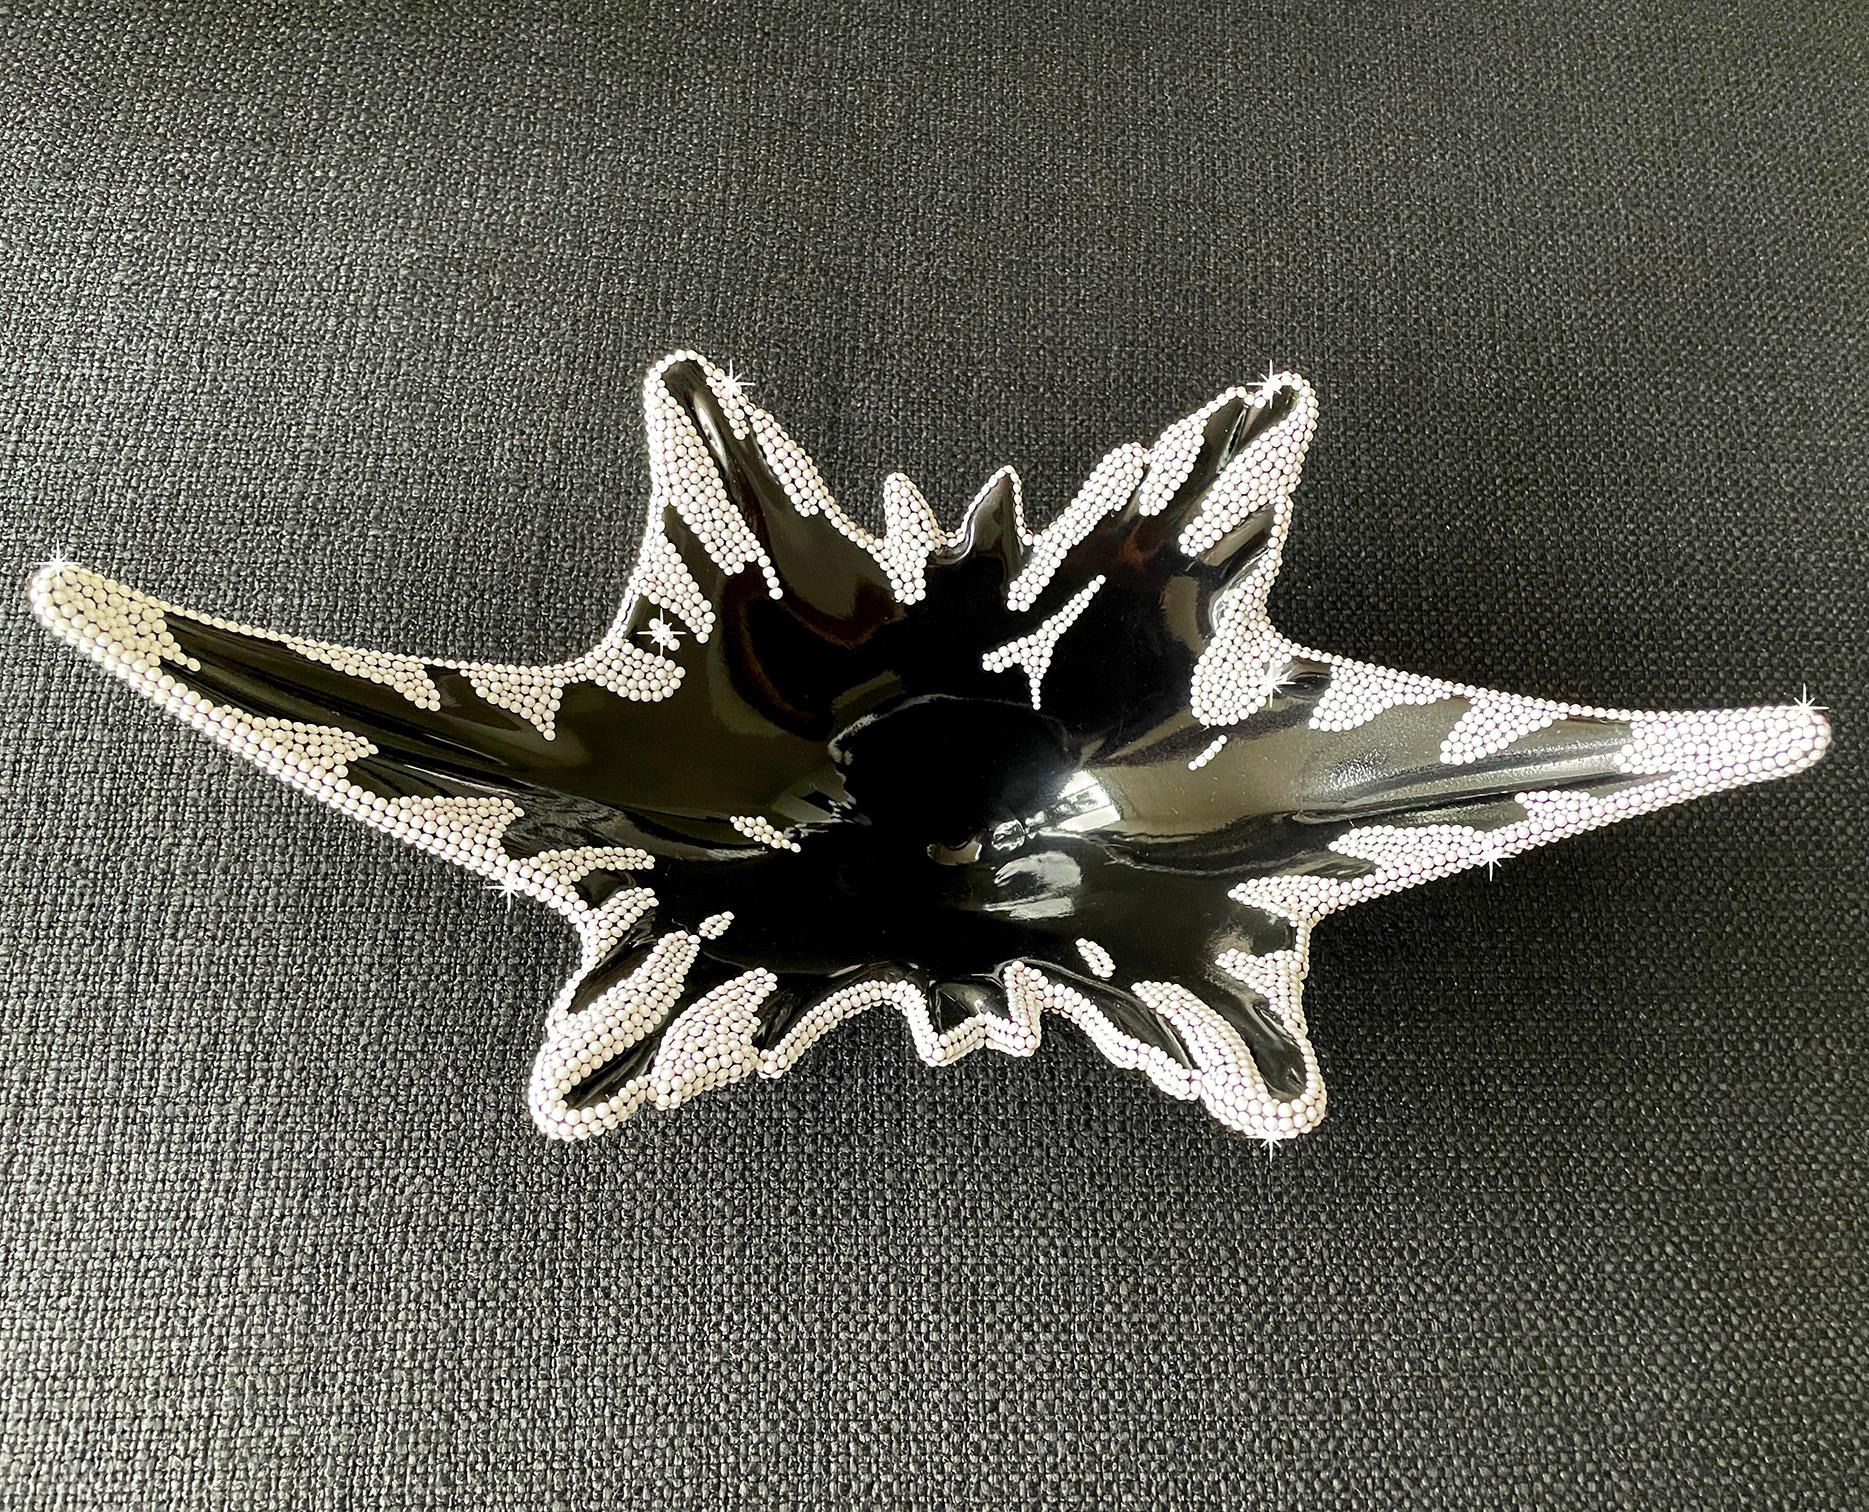 This piece is part of my up-cycled group of objects.I find pieces that have beautiful lines but need to be rescued. In this case I wanted to do a black lacquer finish. With an Artisan who is specialized in lacquer it is primed 2-3 times.Once that